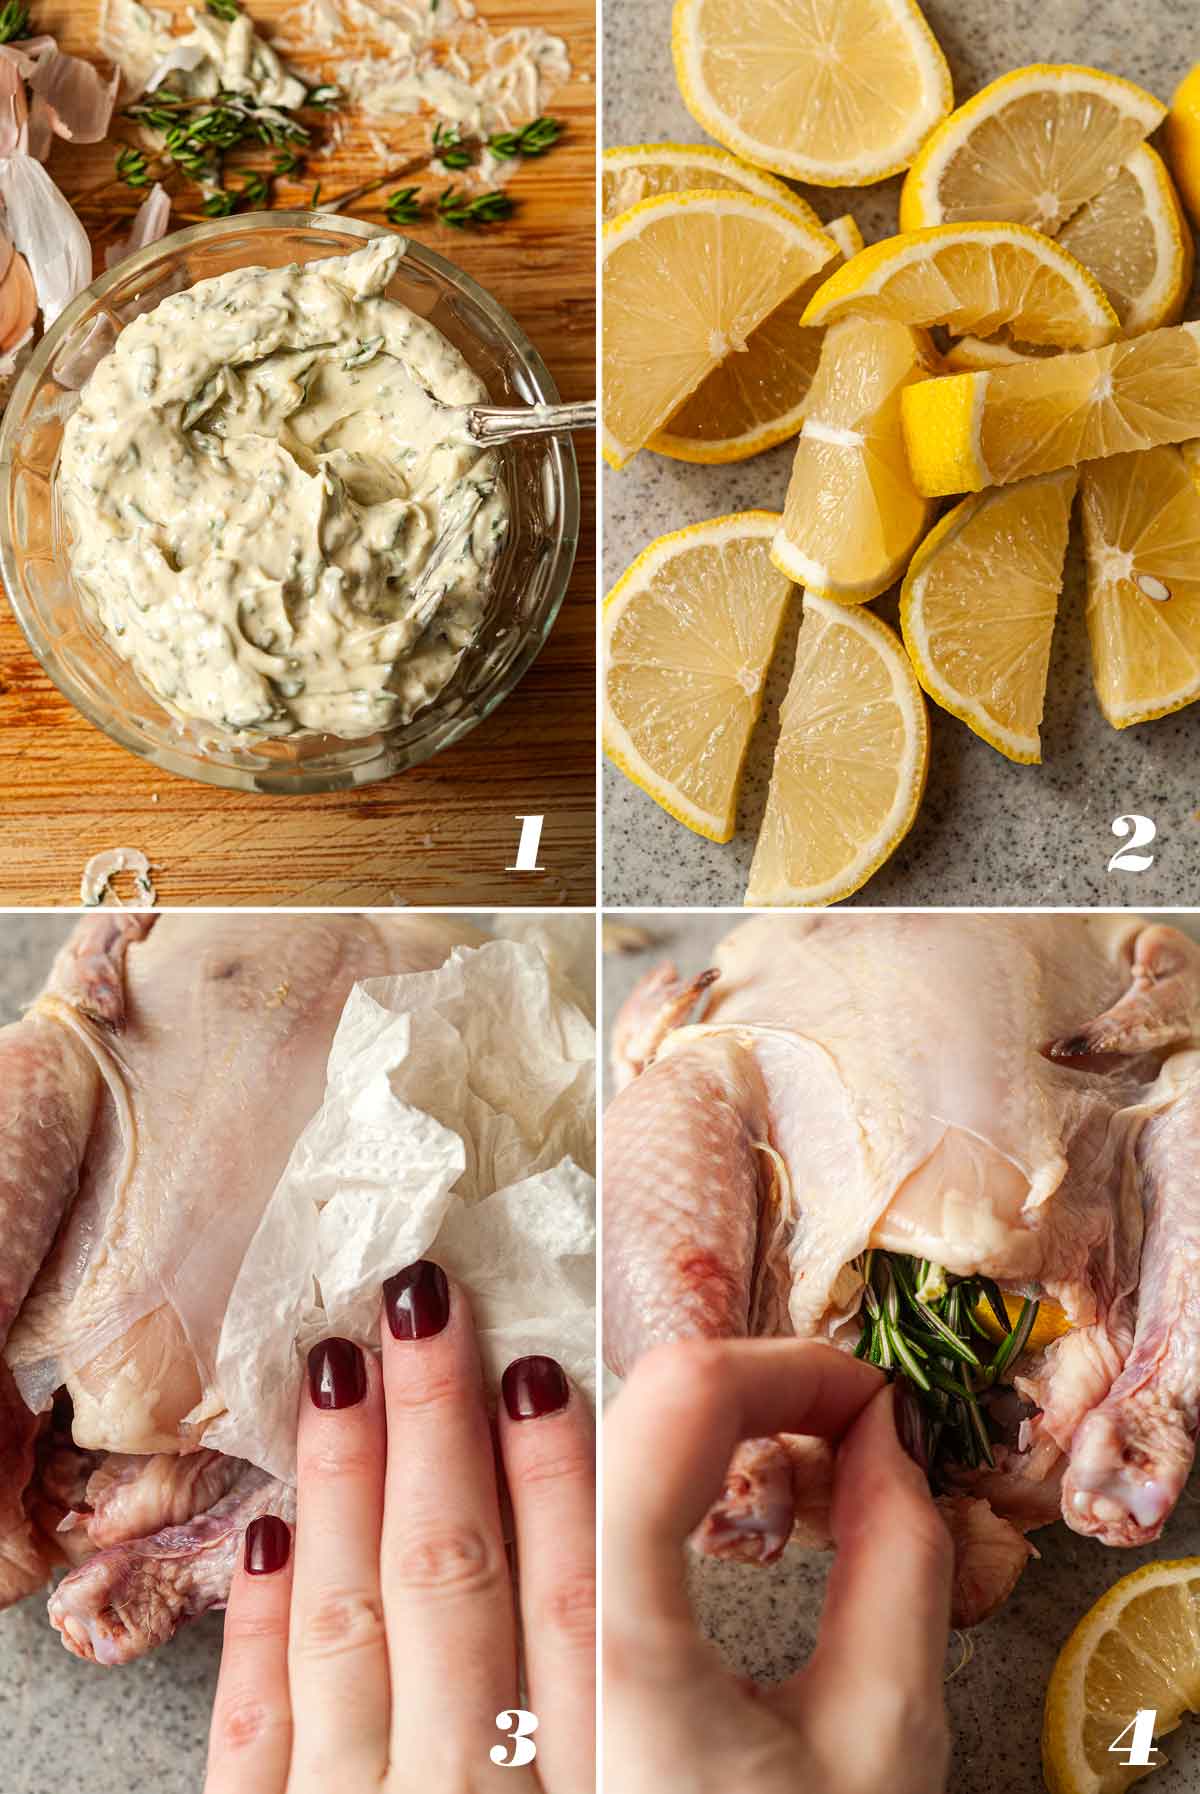 A collage of 4 numbered images showing how to prepare herbed Cornish game hen.